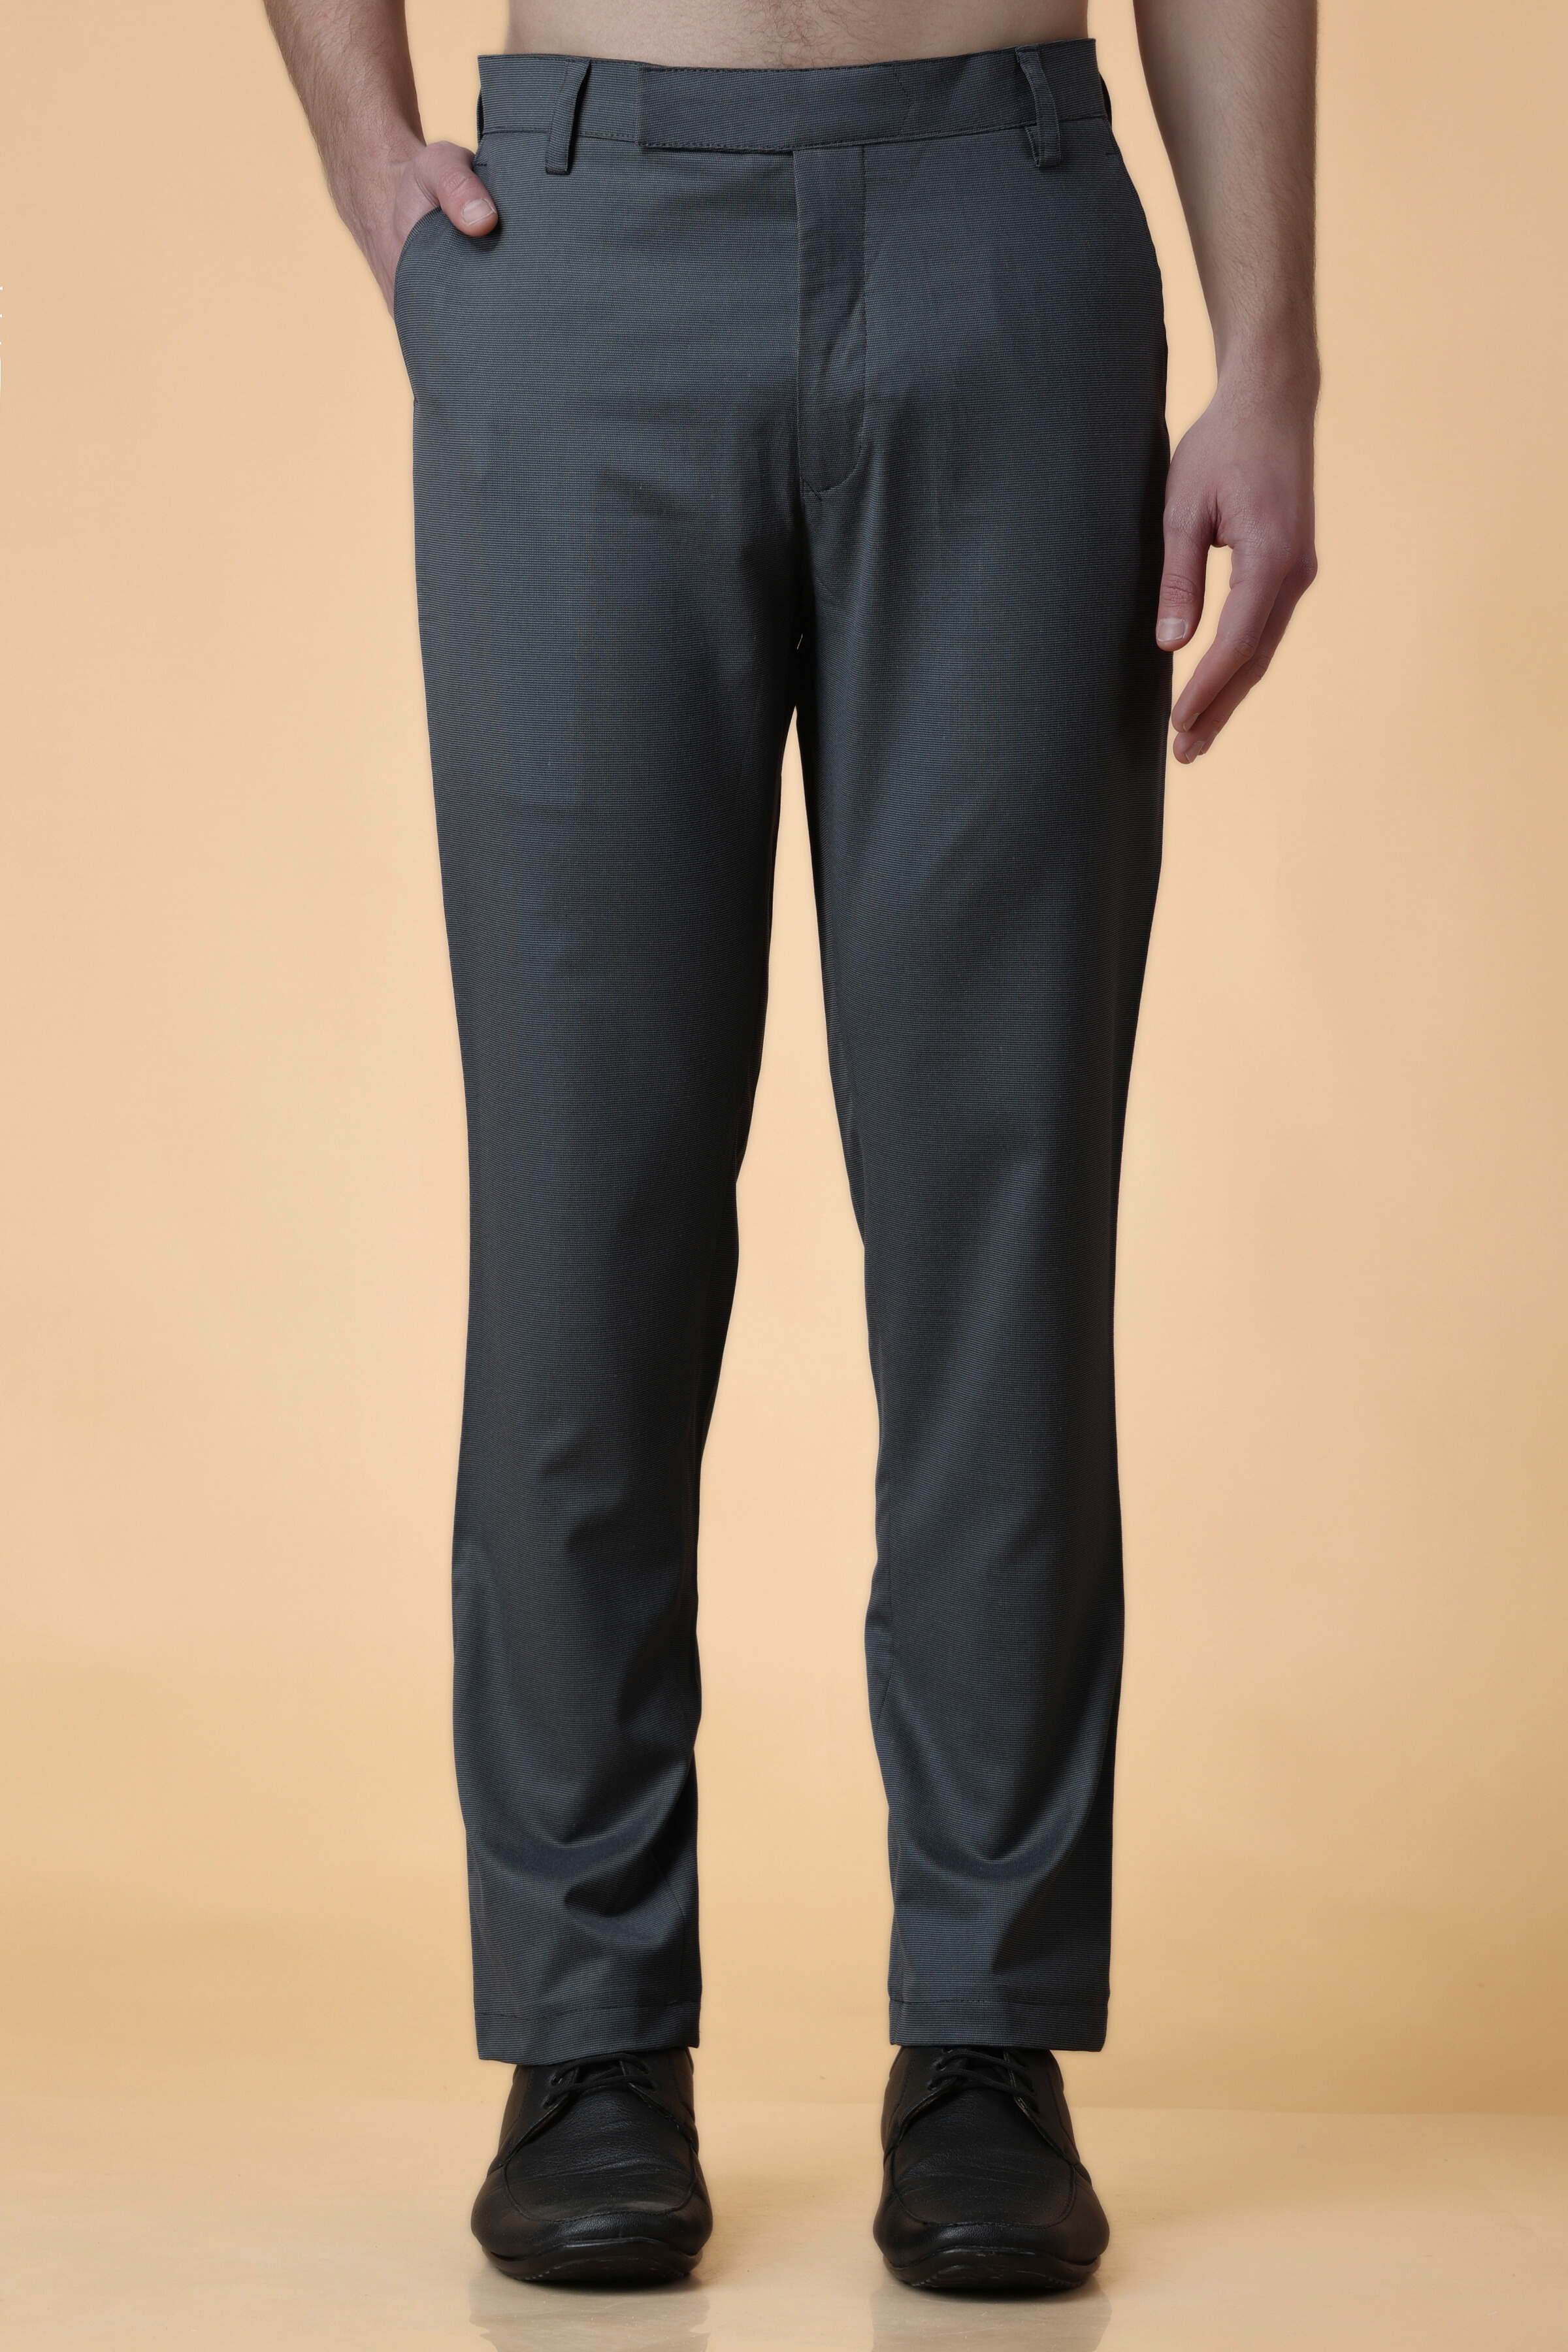 Men's Trail Pants with Adjustable Drawstring | Orton Brothers